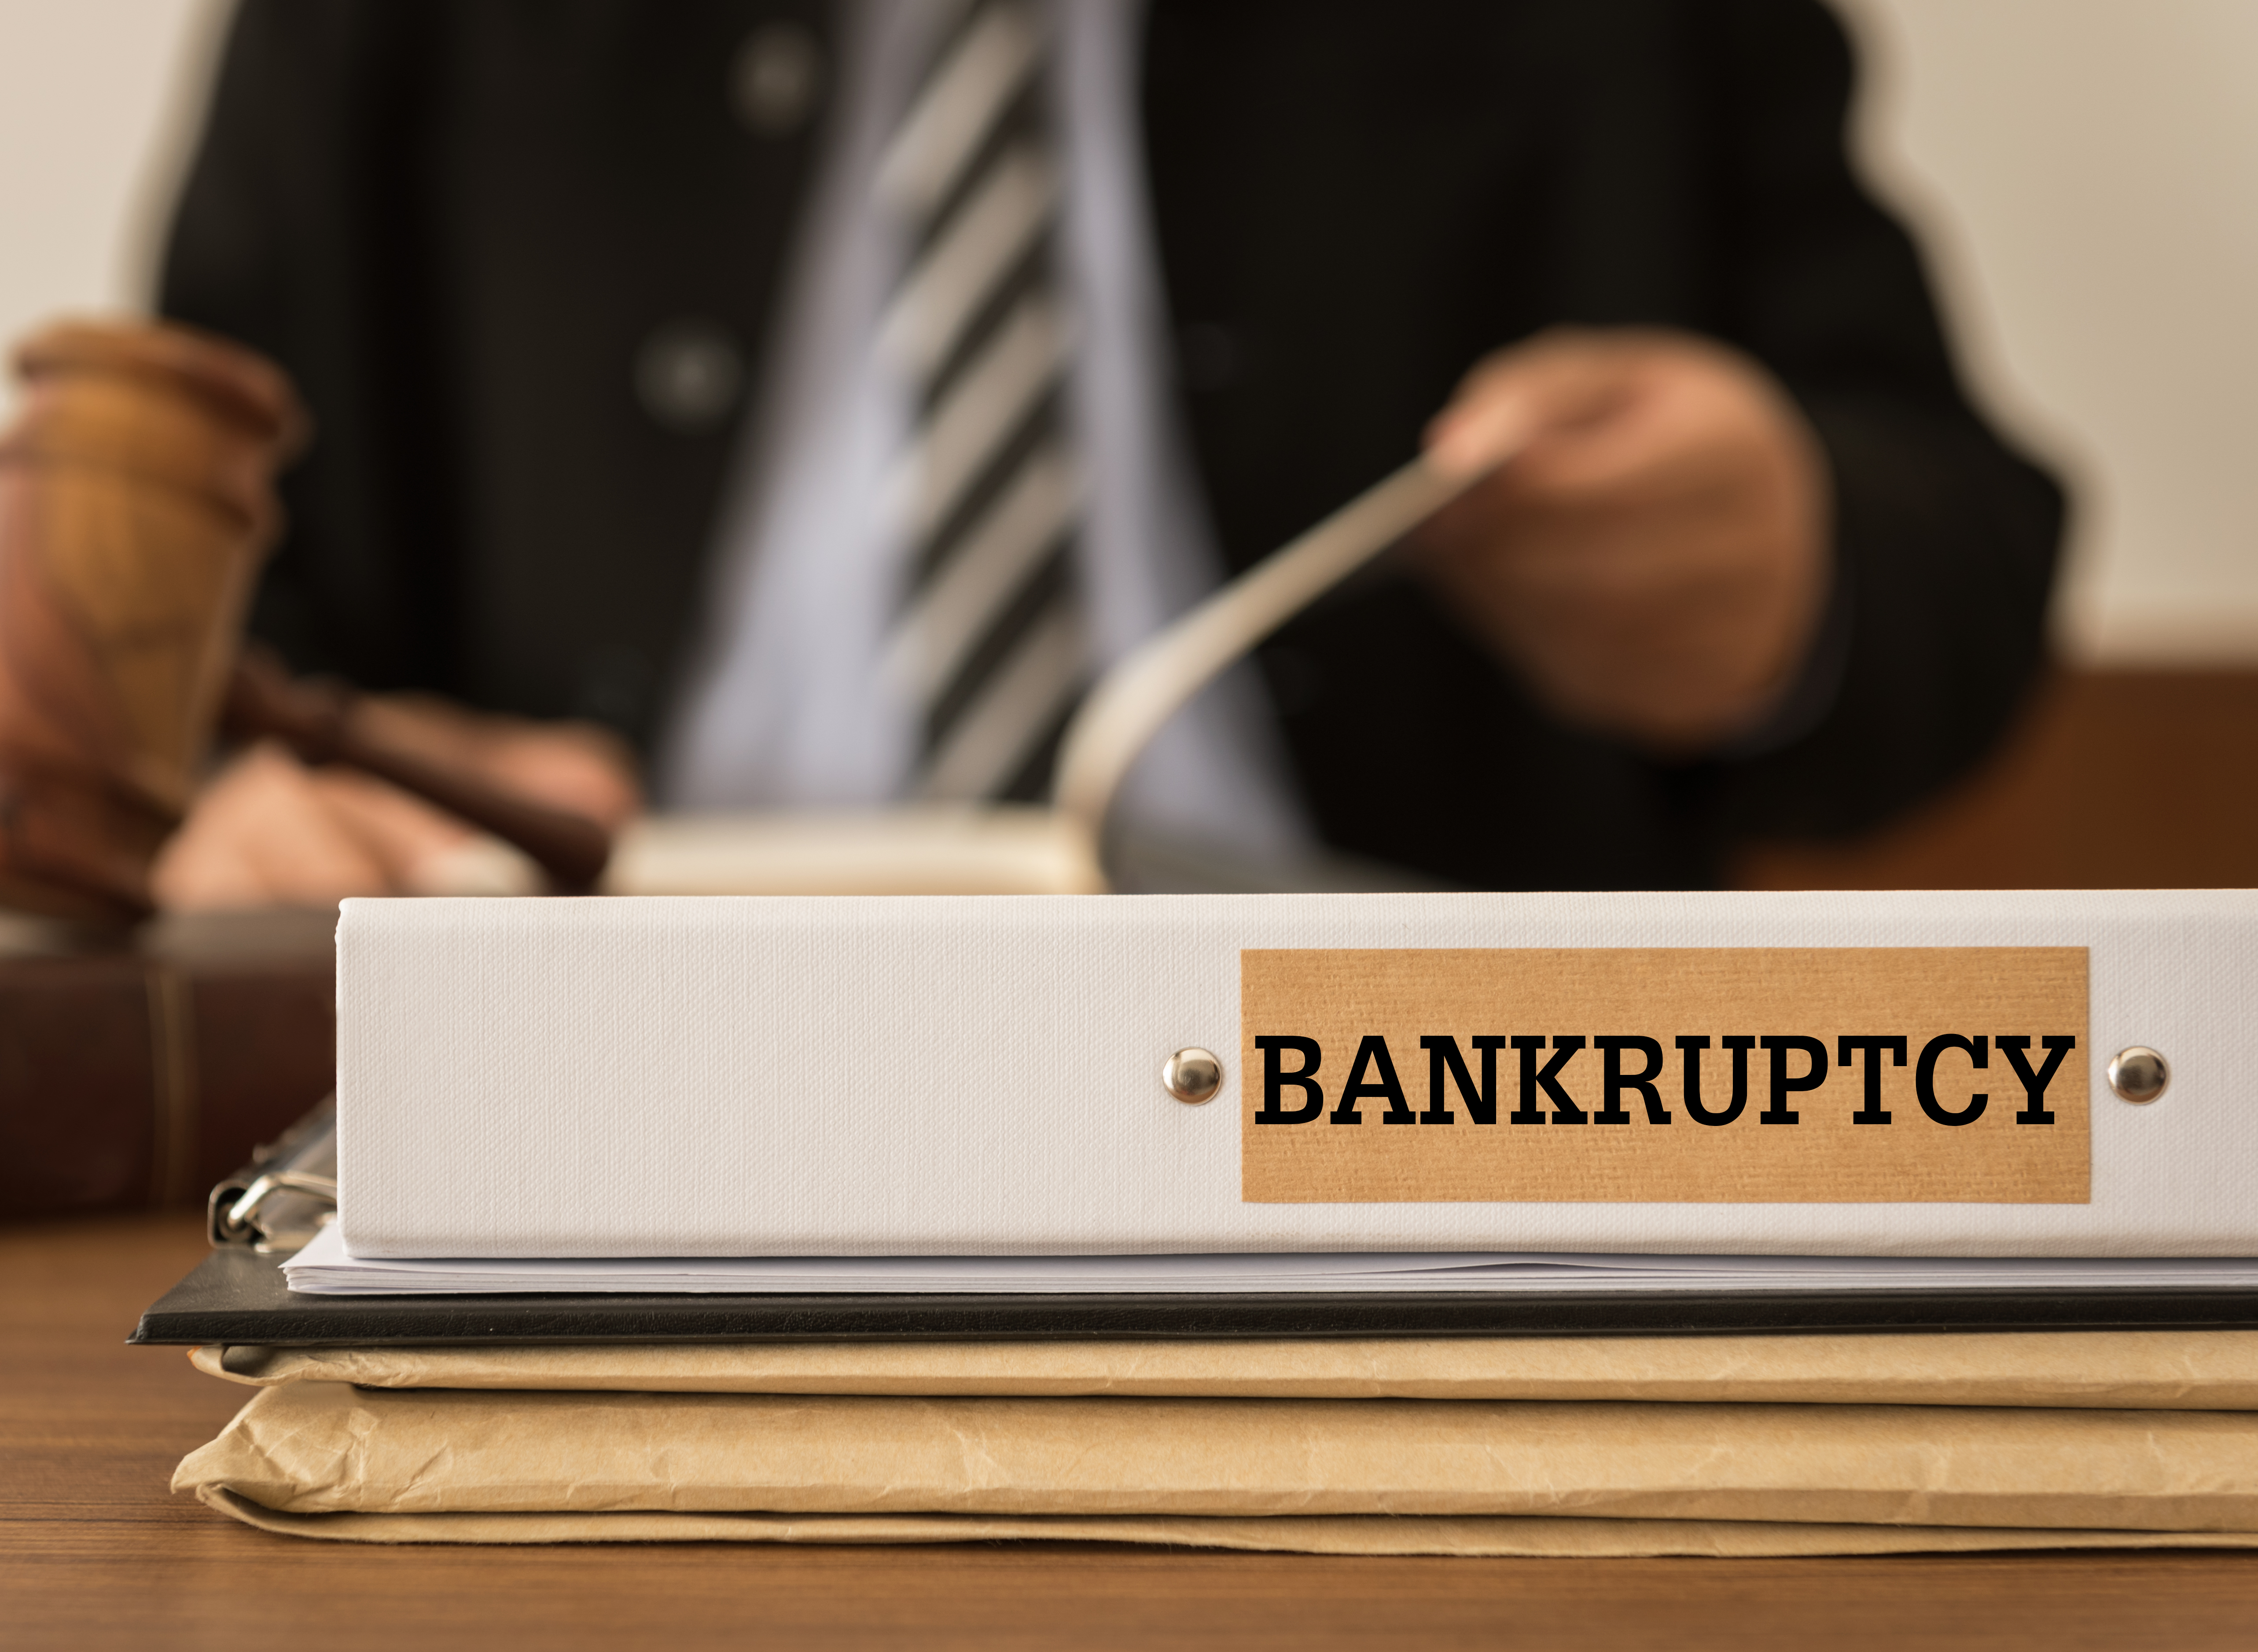 Get Approved For Ch 13 Bankruptcy in Nevada with Price Law Group 866-210-1722